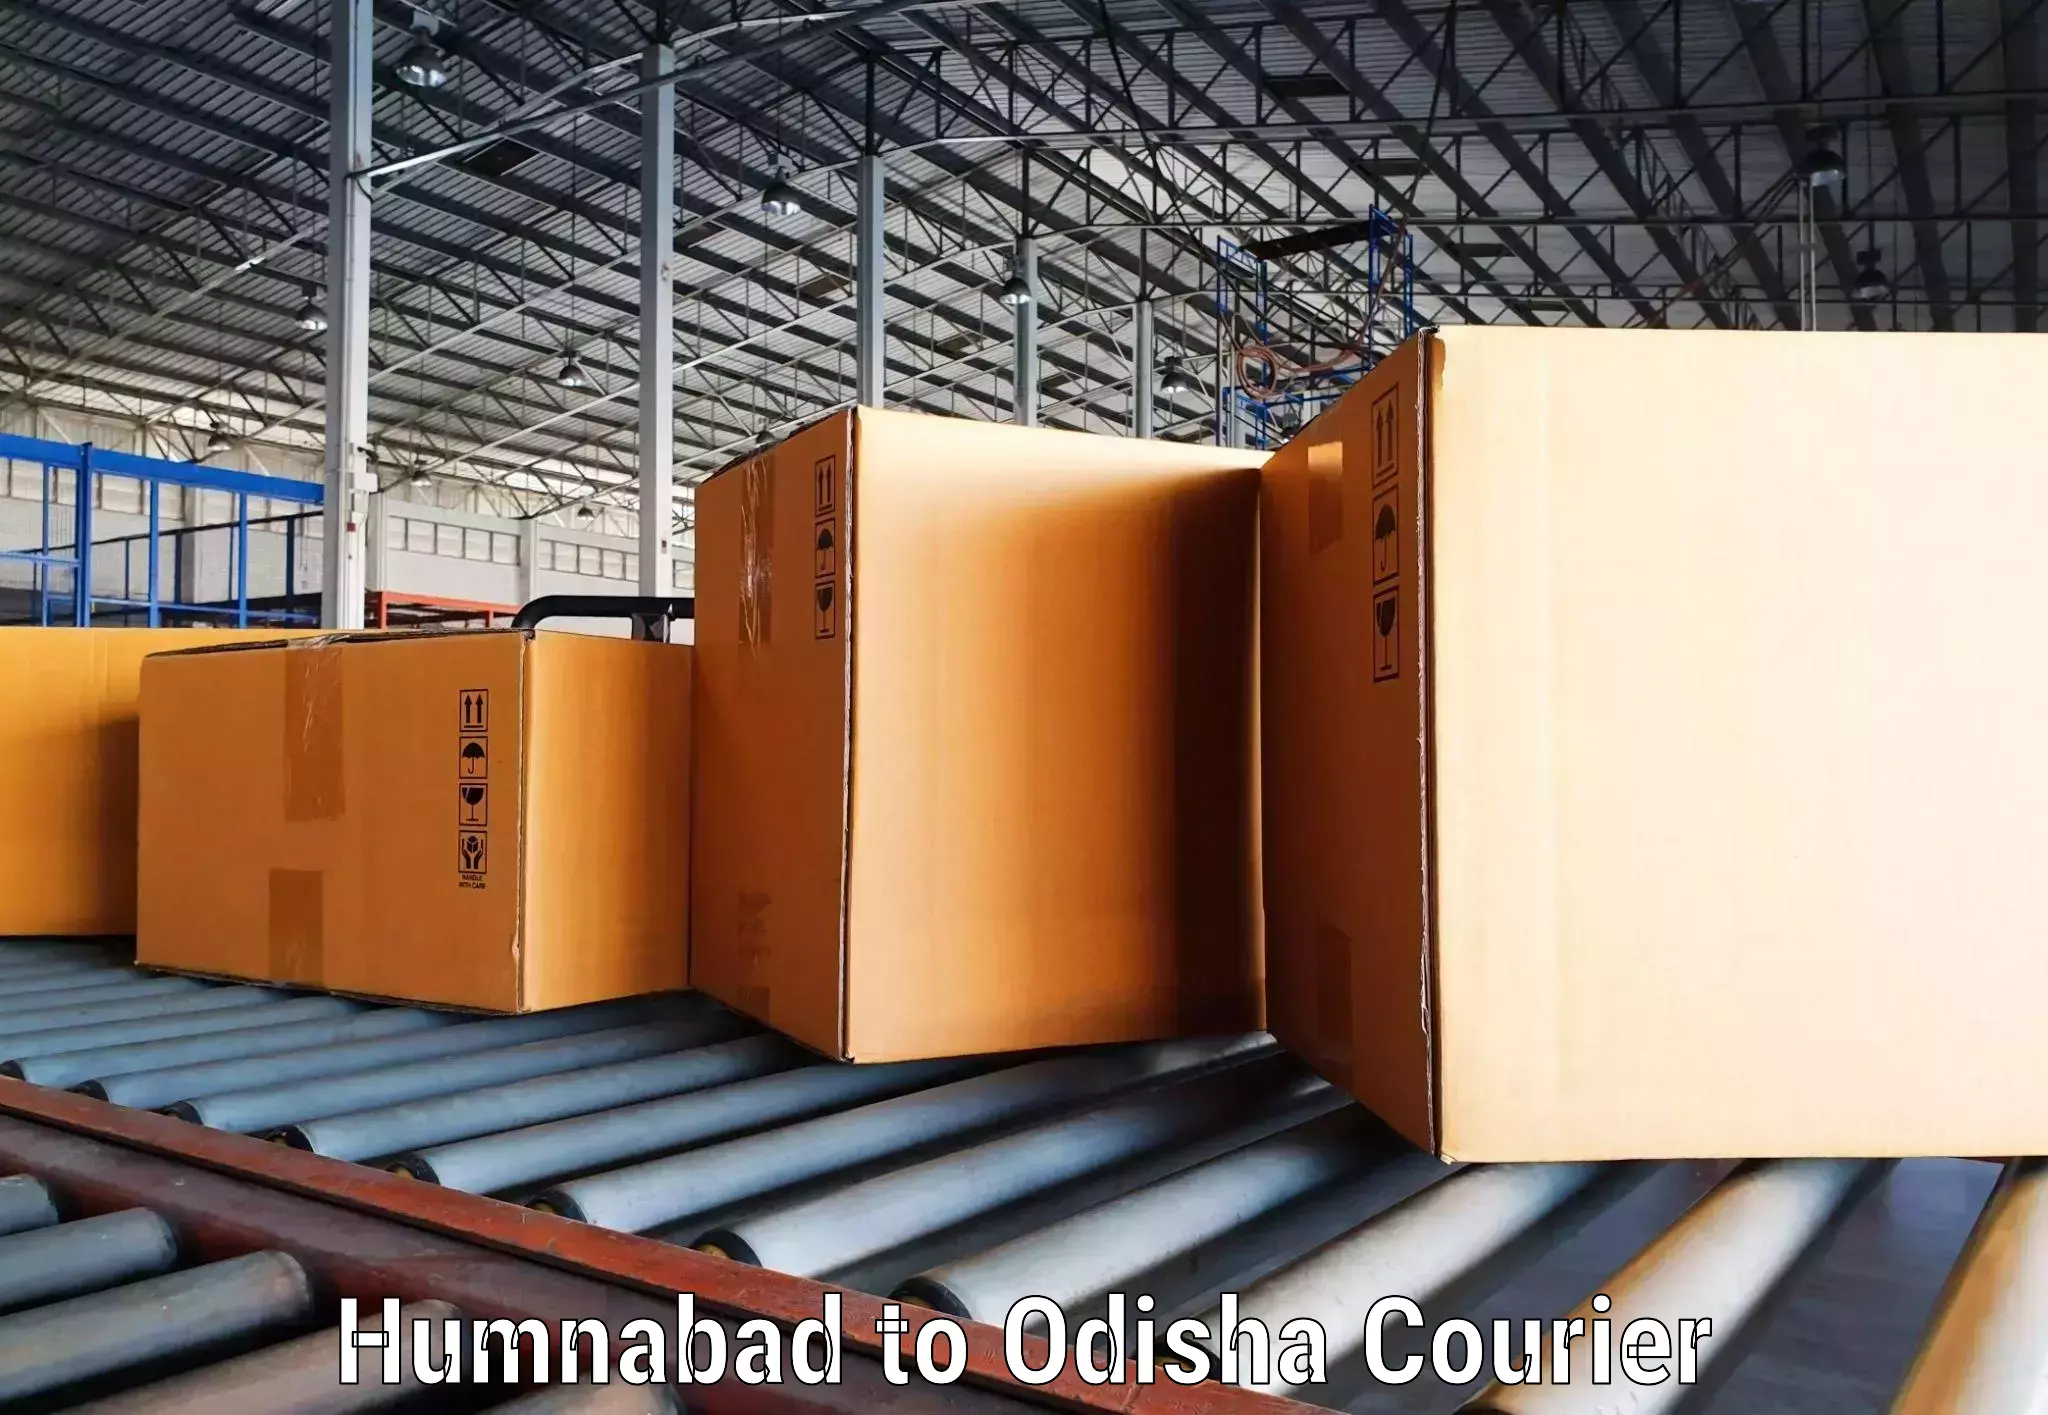 Courier app Humnabad to Dandisahi